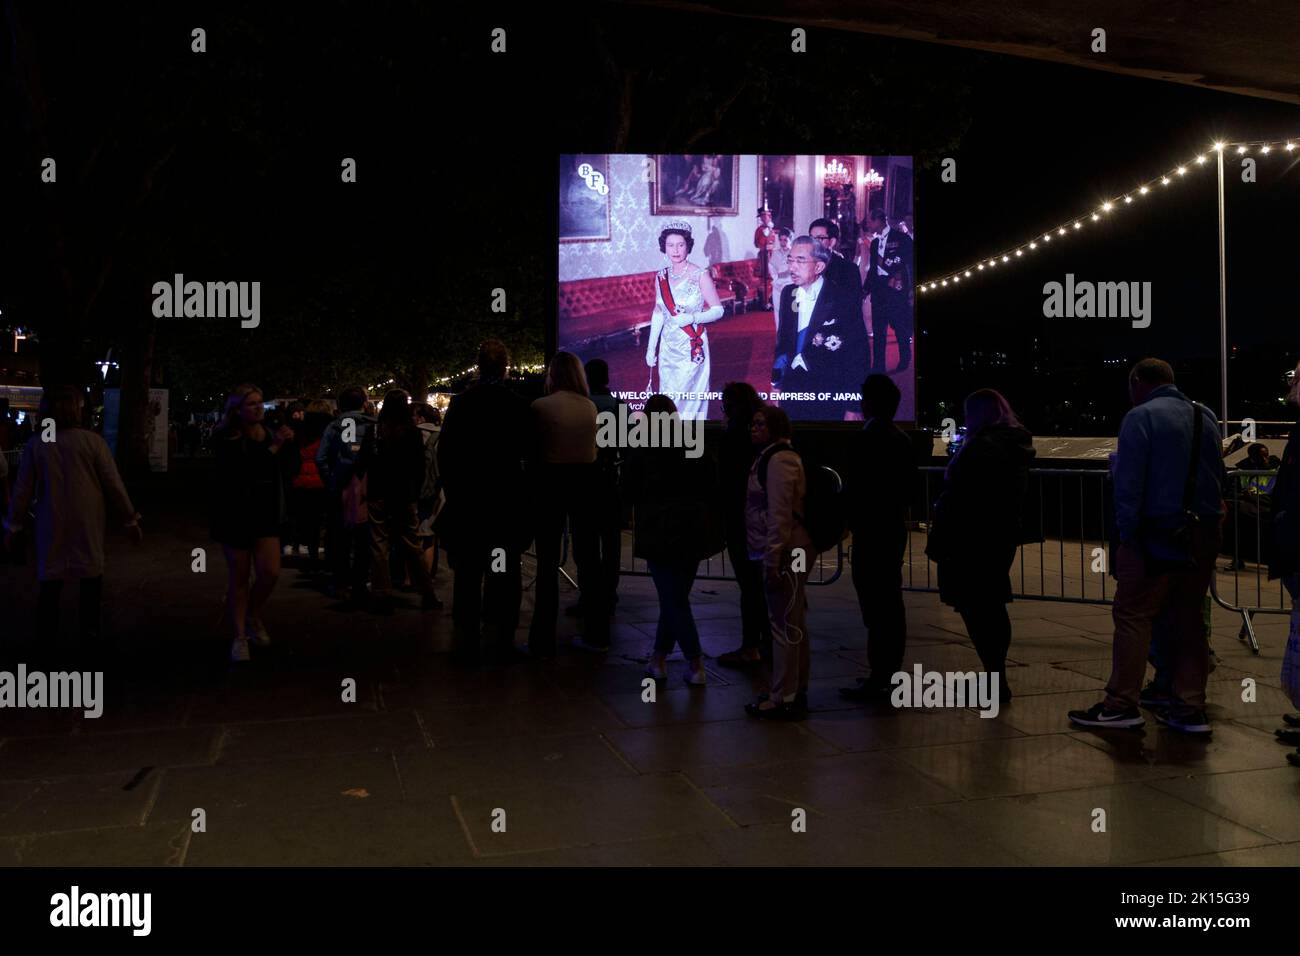 London, UK. 14th Sep, 2022. An outdoor screen showing Queen Elizabeth II along the queue at Southbank as members of the public queue to see the coffin of Queen Elizabeth II as it lays in State inside Westminster Hall, at the Palace of Westminster. Members of the public are able to pay respects to Her Majesty Queen Elizabeth II for 23 hours a day from September 14, 2022. A long queue is set to stretch 10 miles across London and a million people are expected to join for the Lying-in-State of Queen Elizabeth II at the Palace of Westminster in the next few days until the funeral at Stock Photo